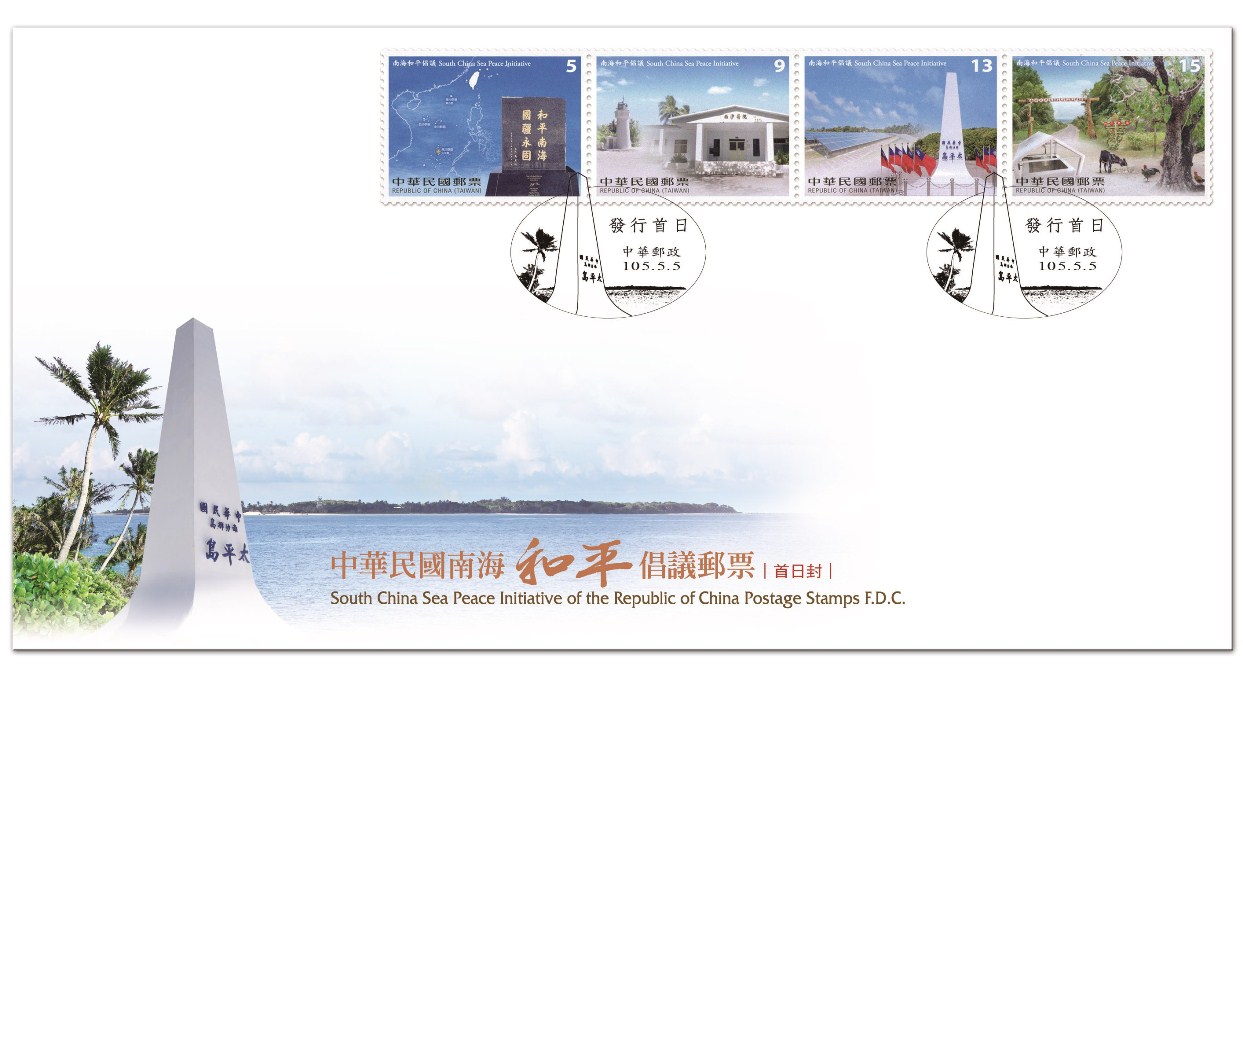 South China Sea Peace Initiative of the Republic of China Postage Stamps Pre-cancelled FDC affixed with a complete set of stamps